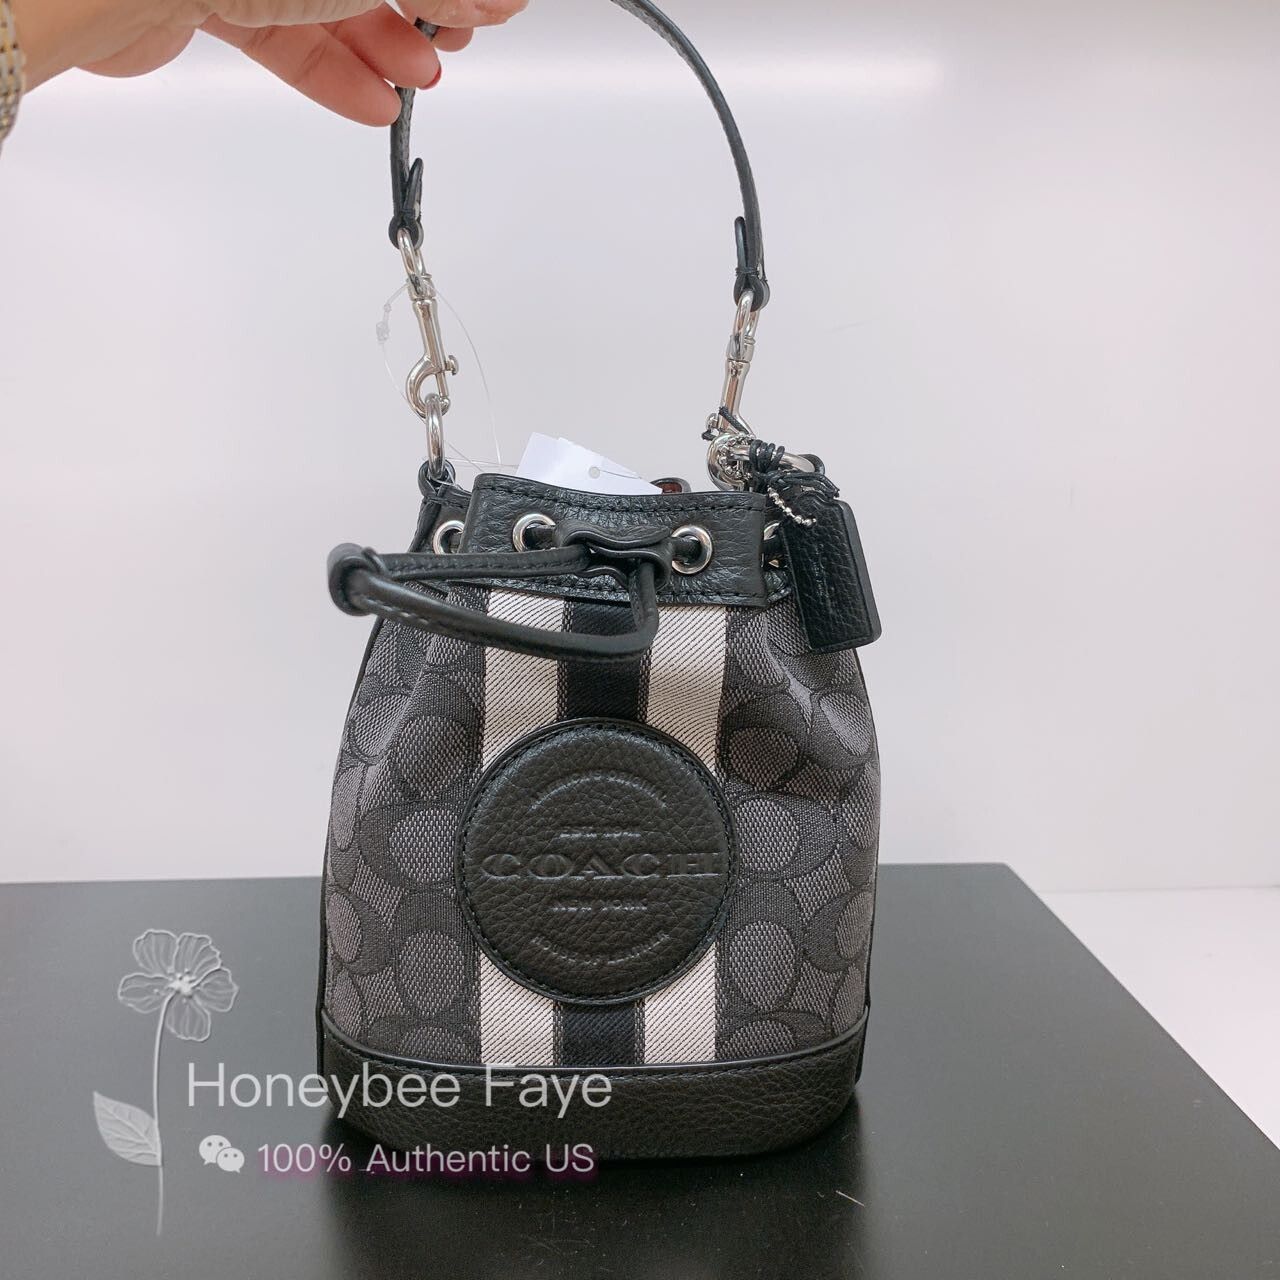 Coach Women's Mini Dempsey Bucket Bag in Signature Jacquard with Stripe Patch